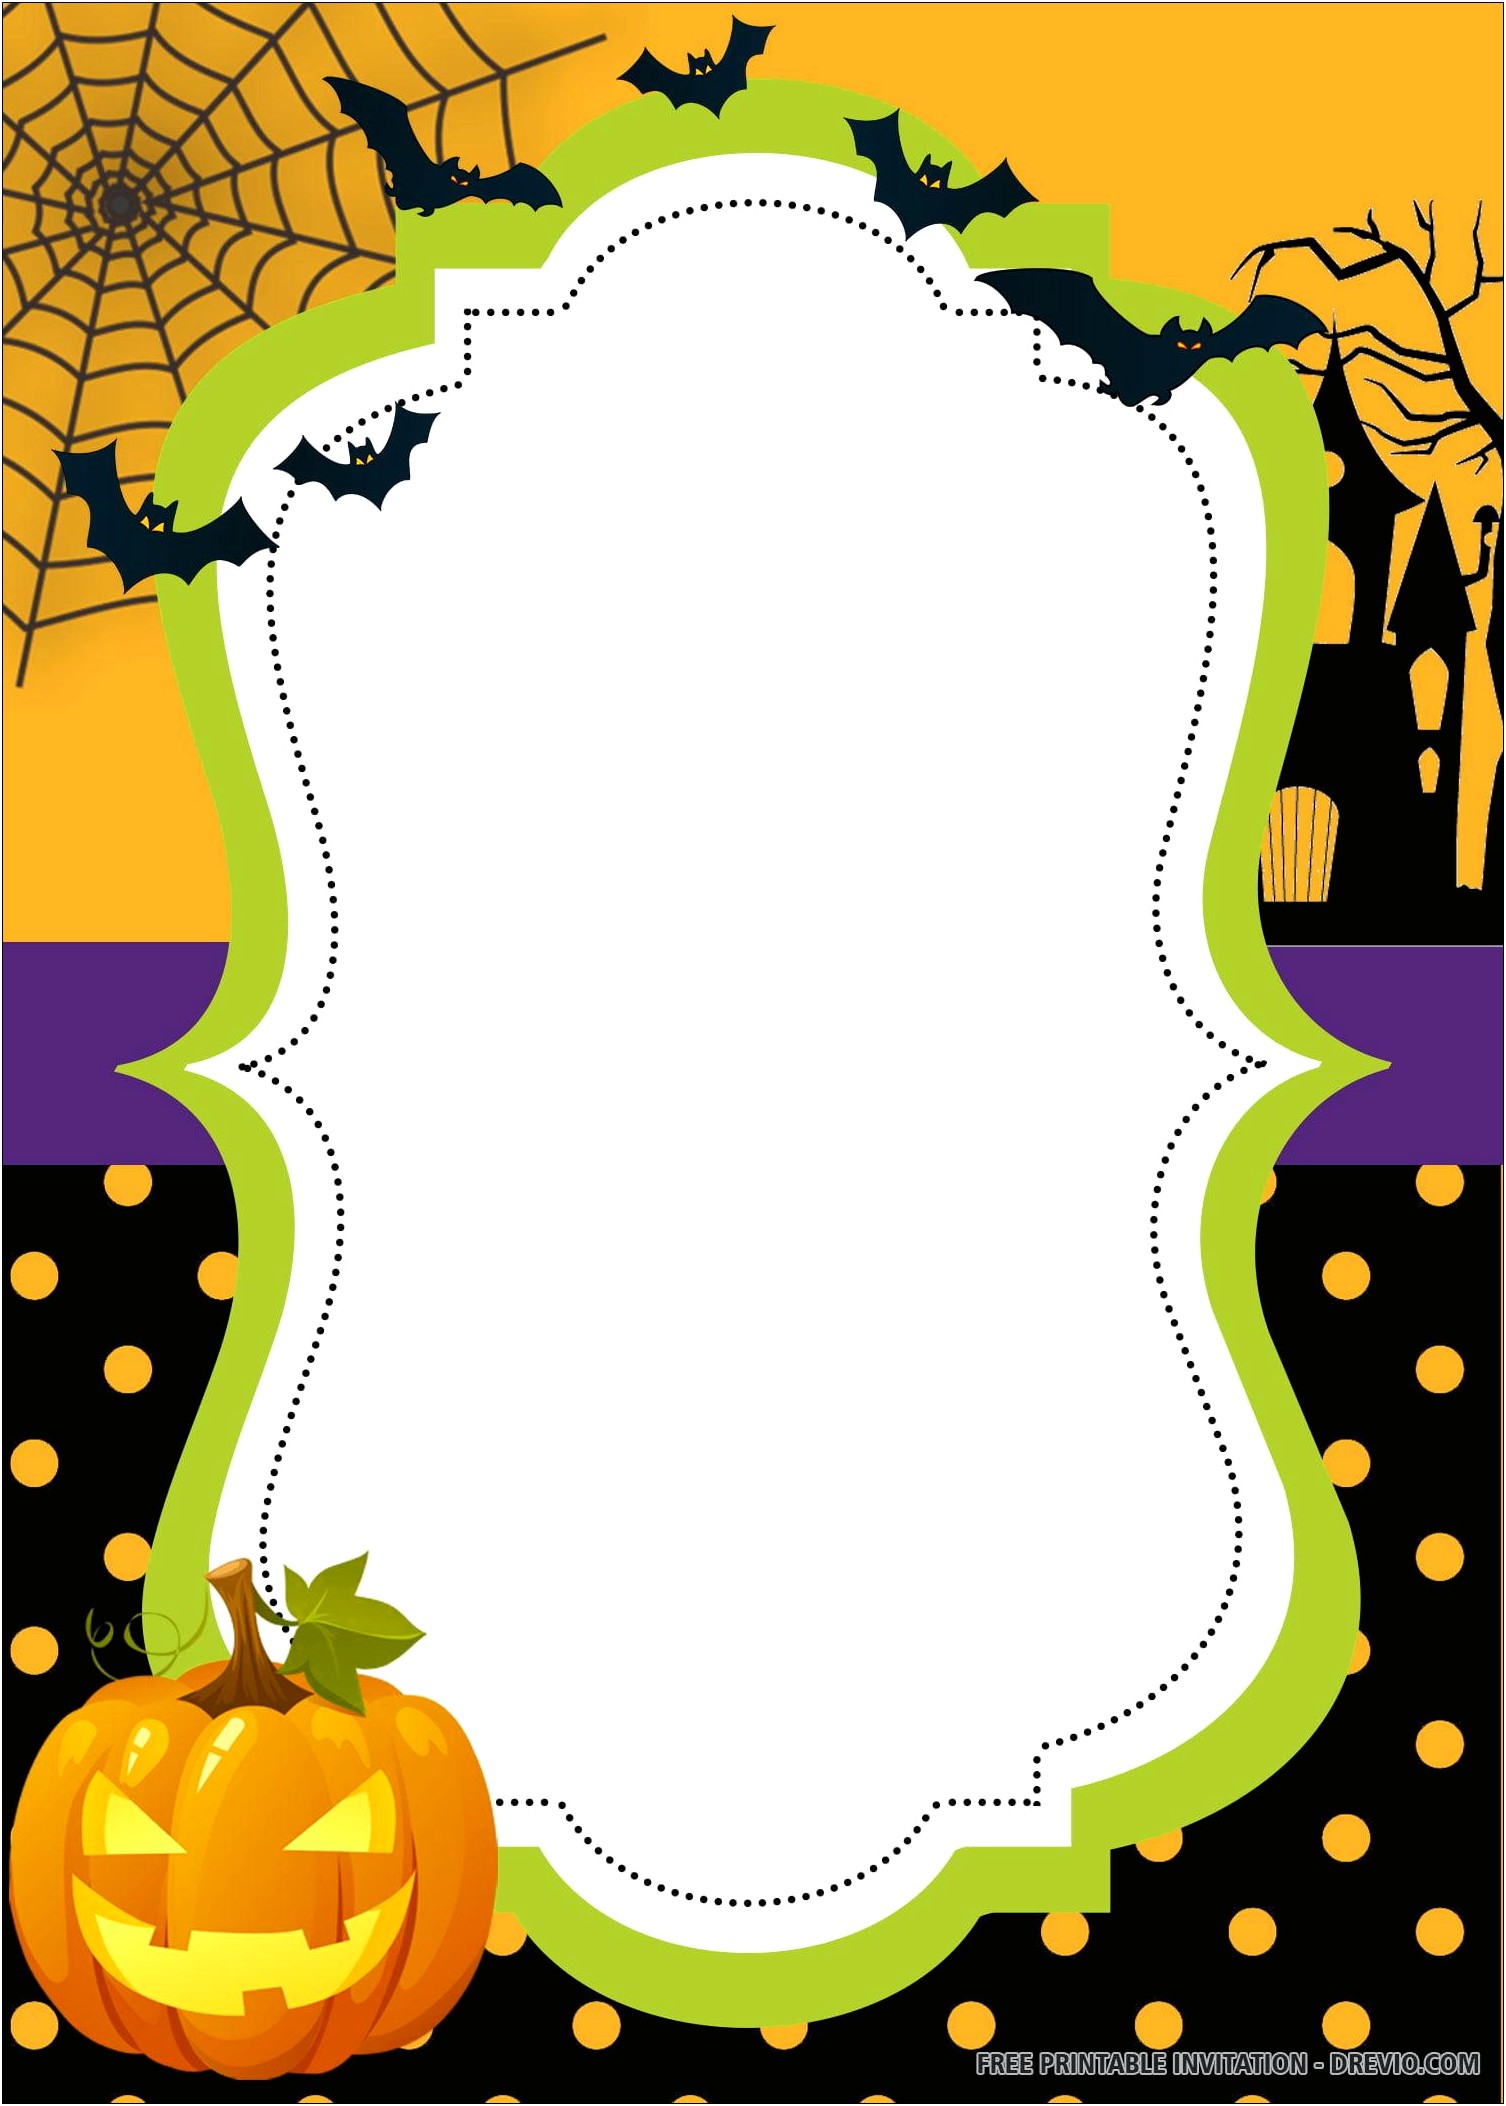 35-halloween-invitation-free-psd-vector-eps-ai-format-download